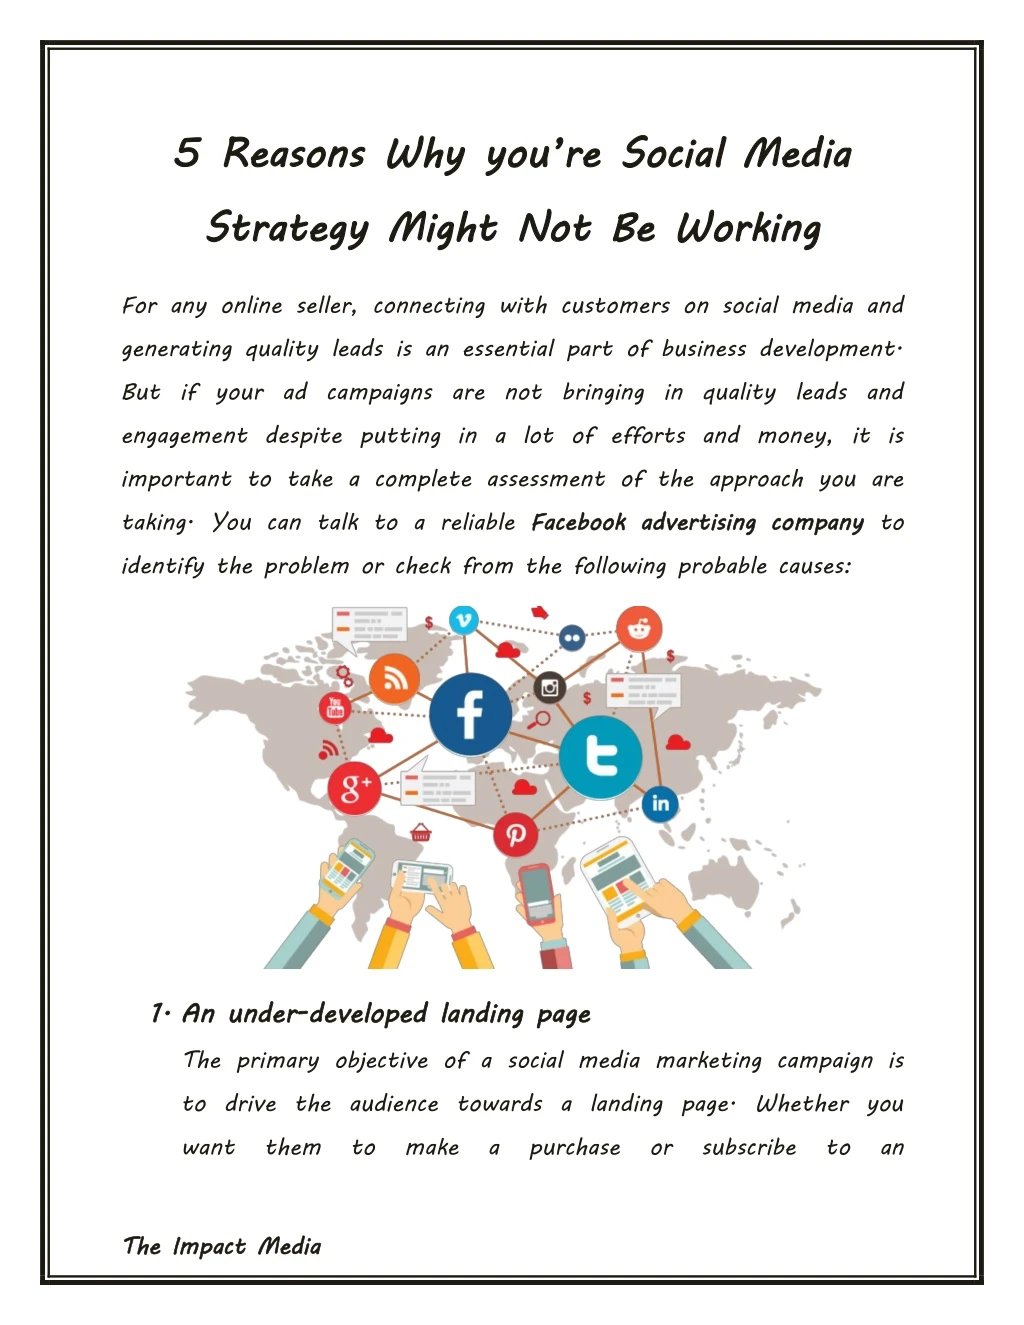 5 reasons why strategy might not be working